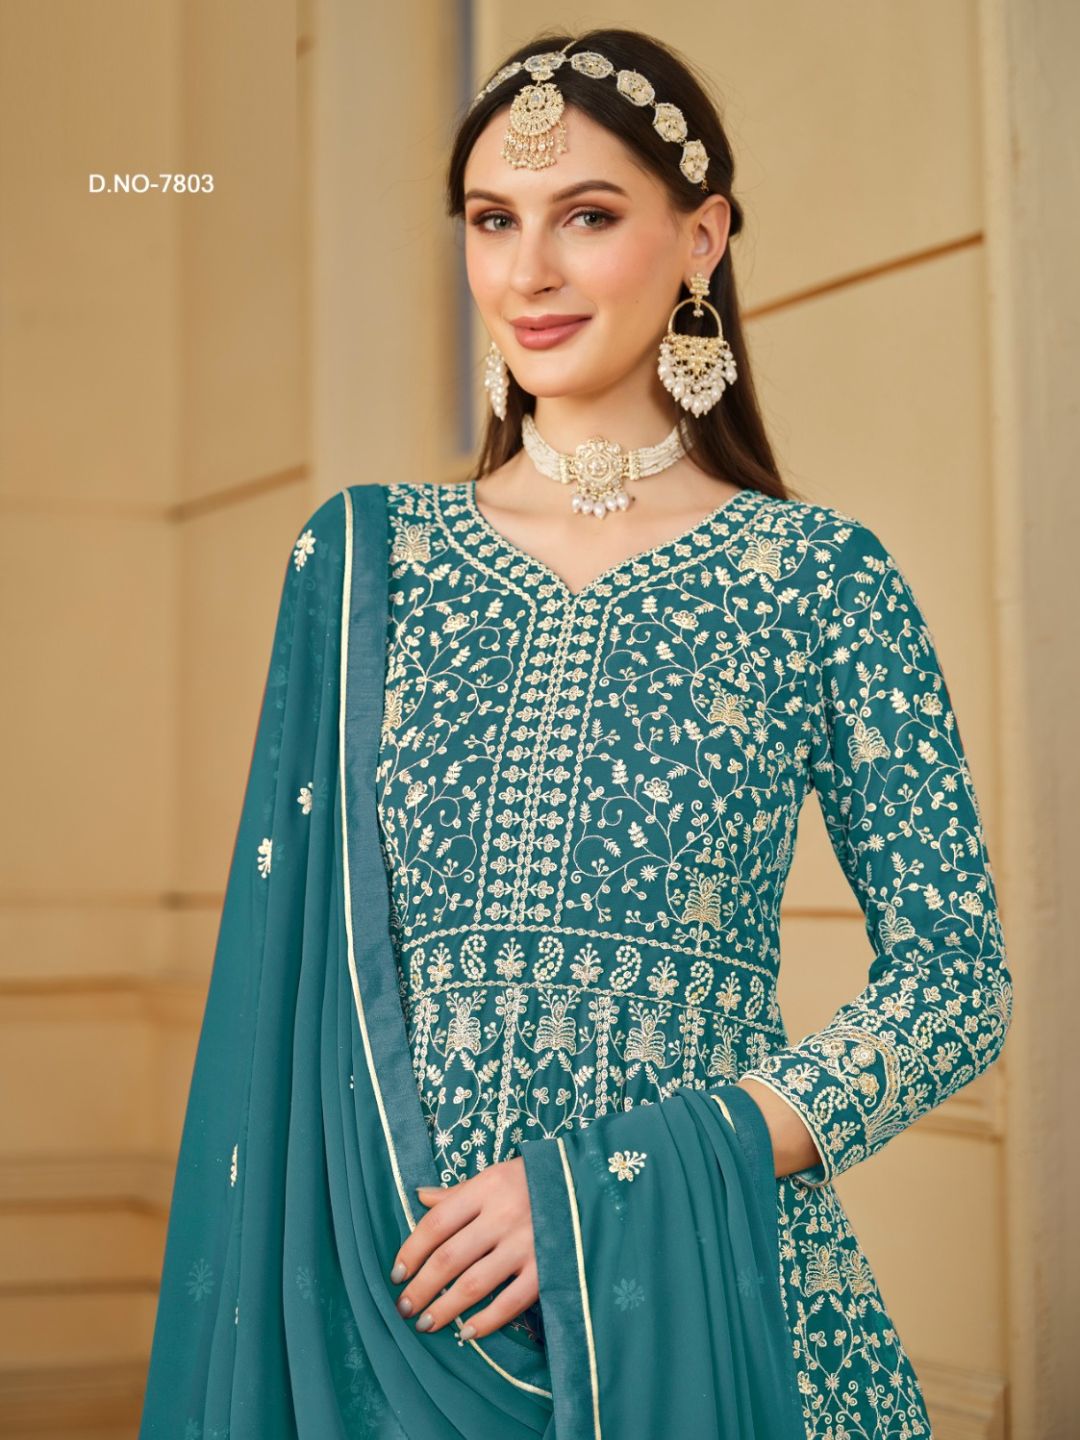 Georgette Embroidered Bollywood Salwar Kameez in Blue with Stone work-81991